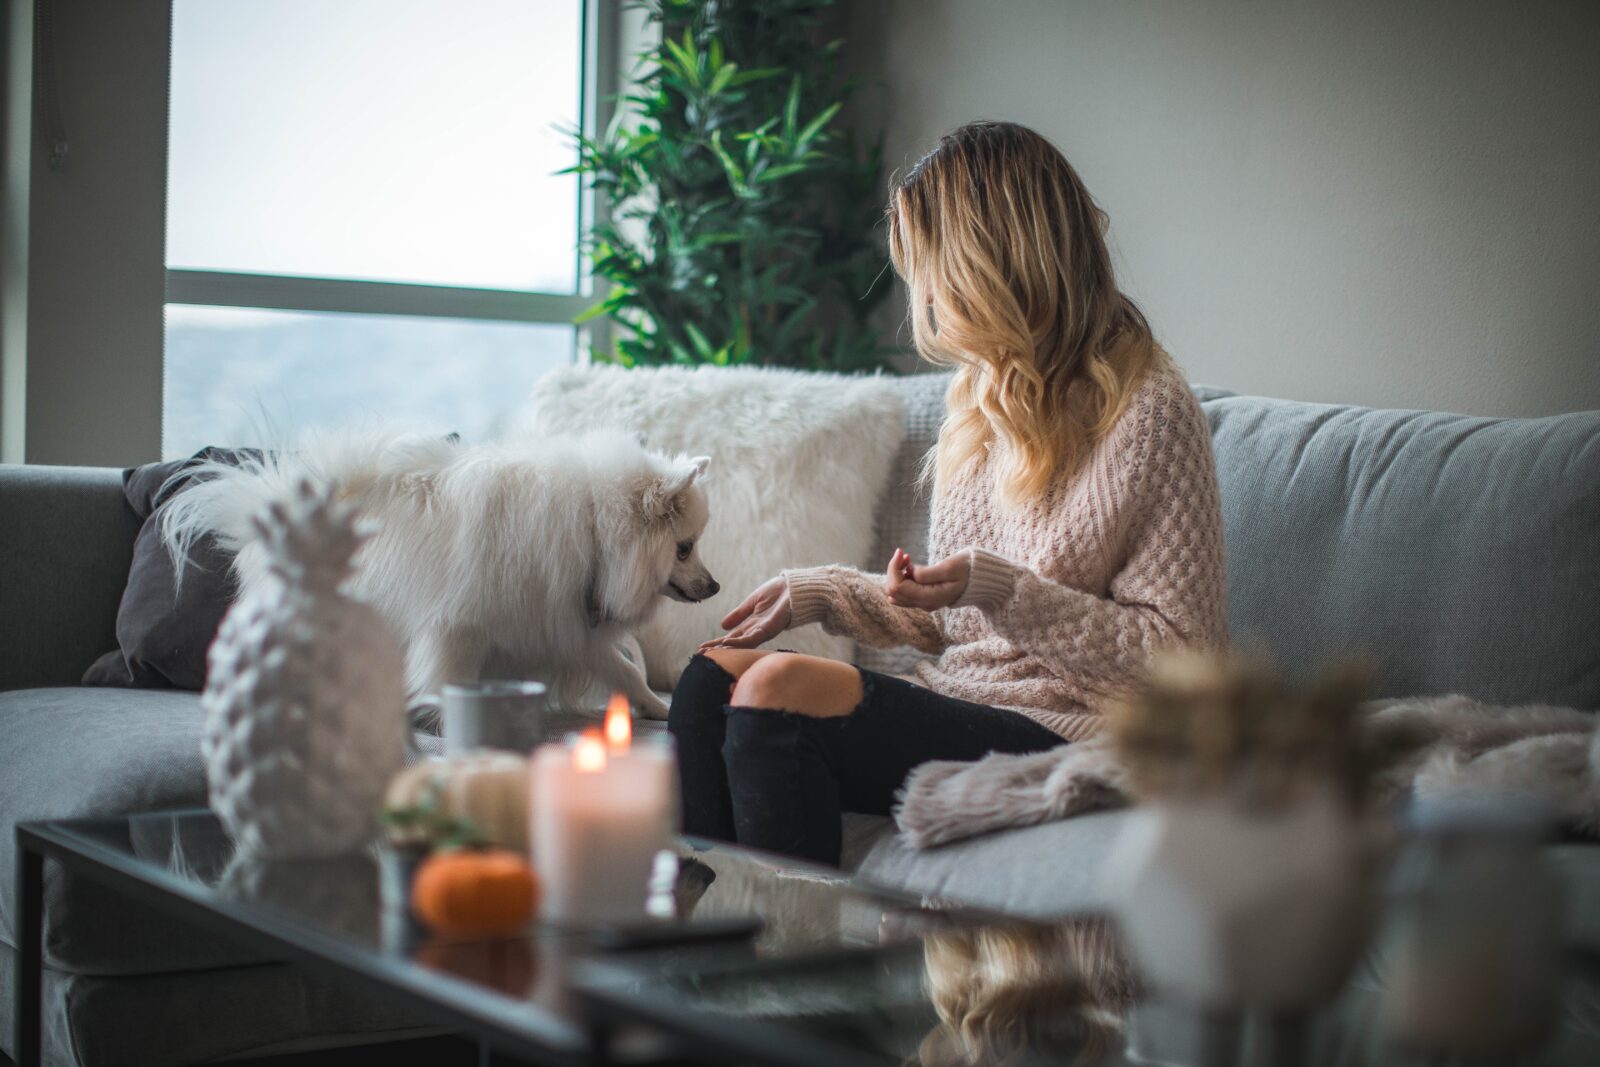 Lady on sofa with dog and candle